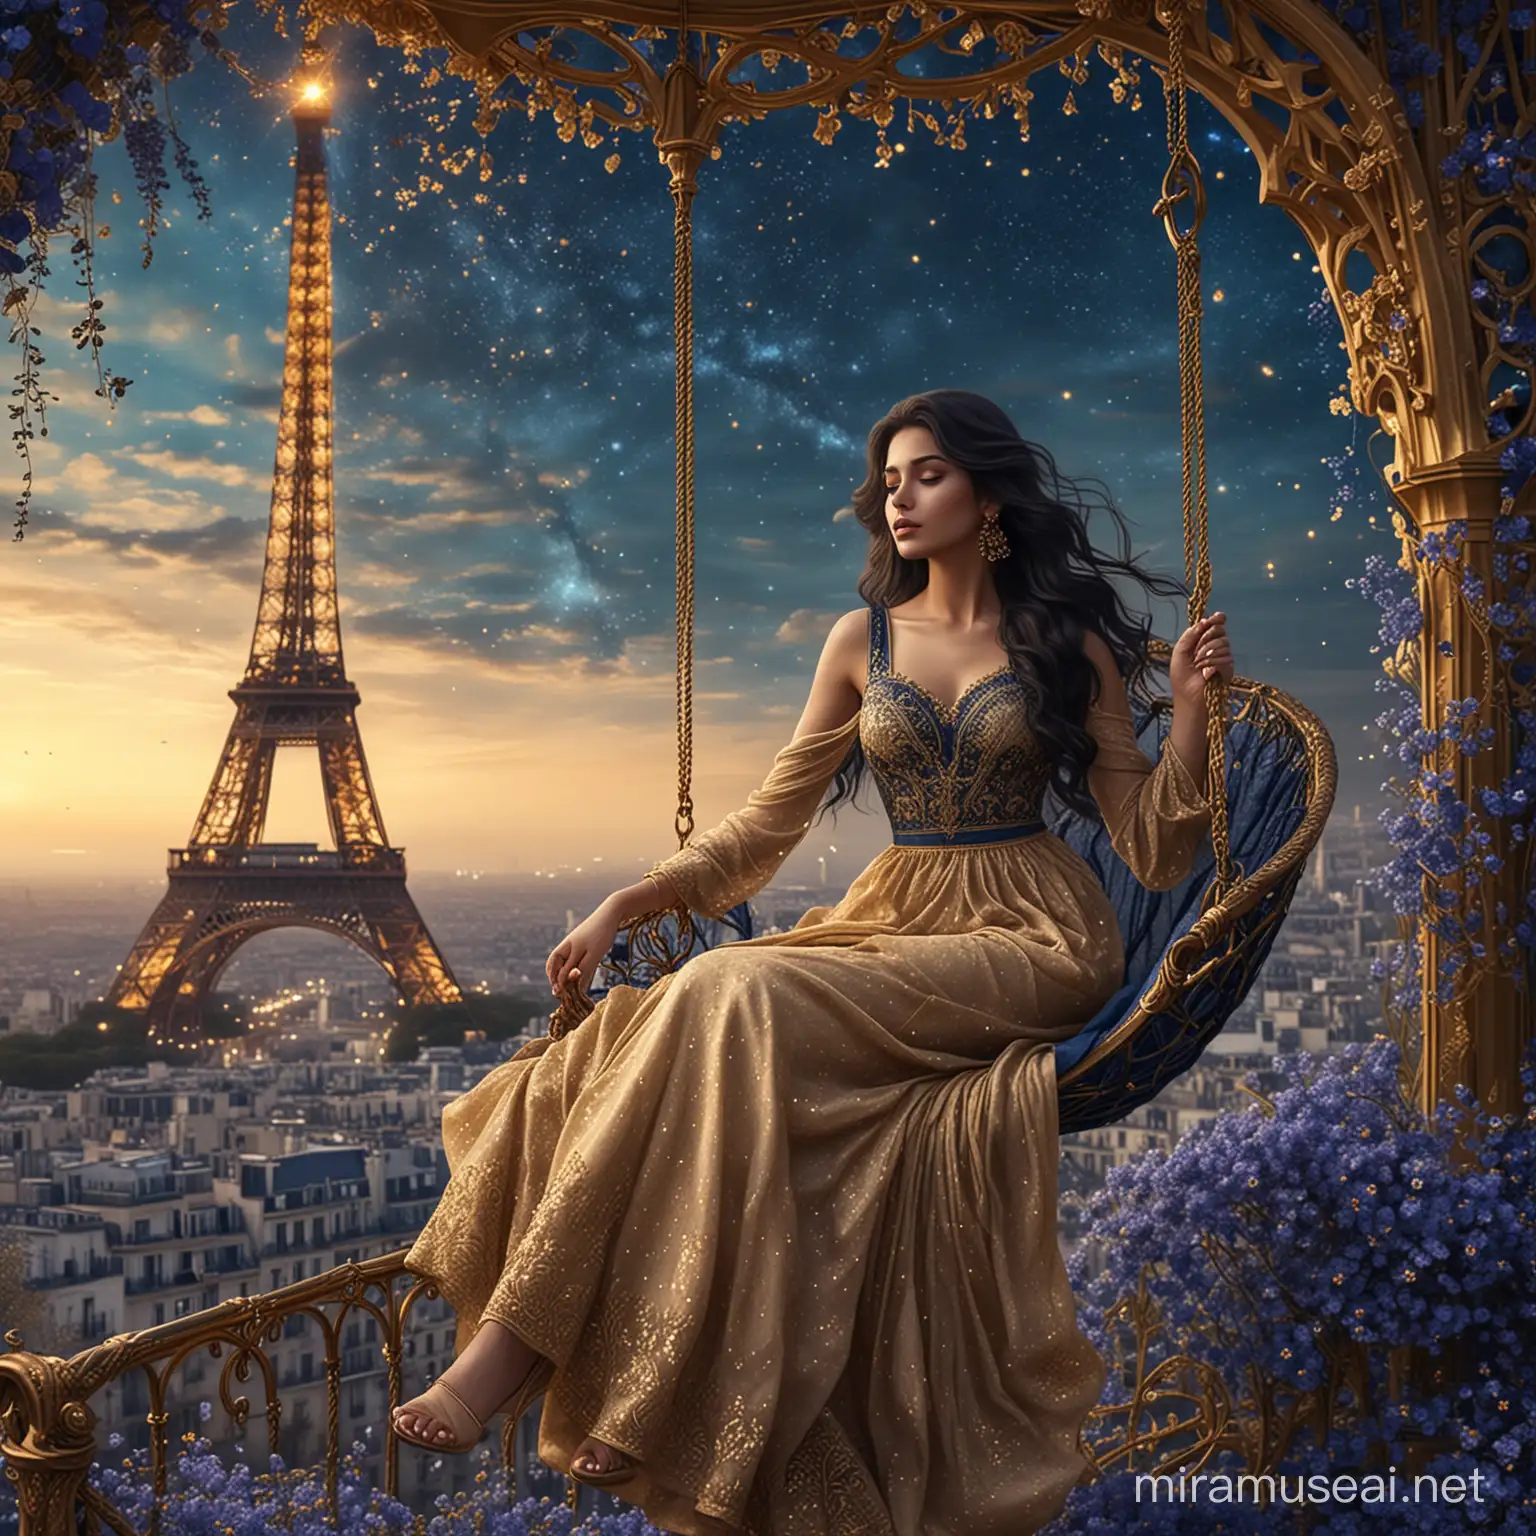 Elegant Woman on Majestic Swing amidst Blue Flowers and Golden Dust